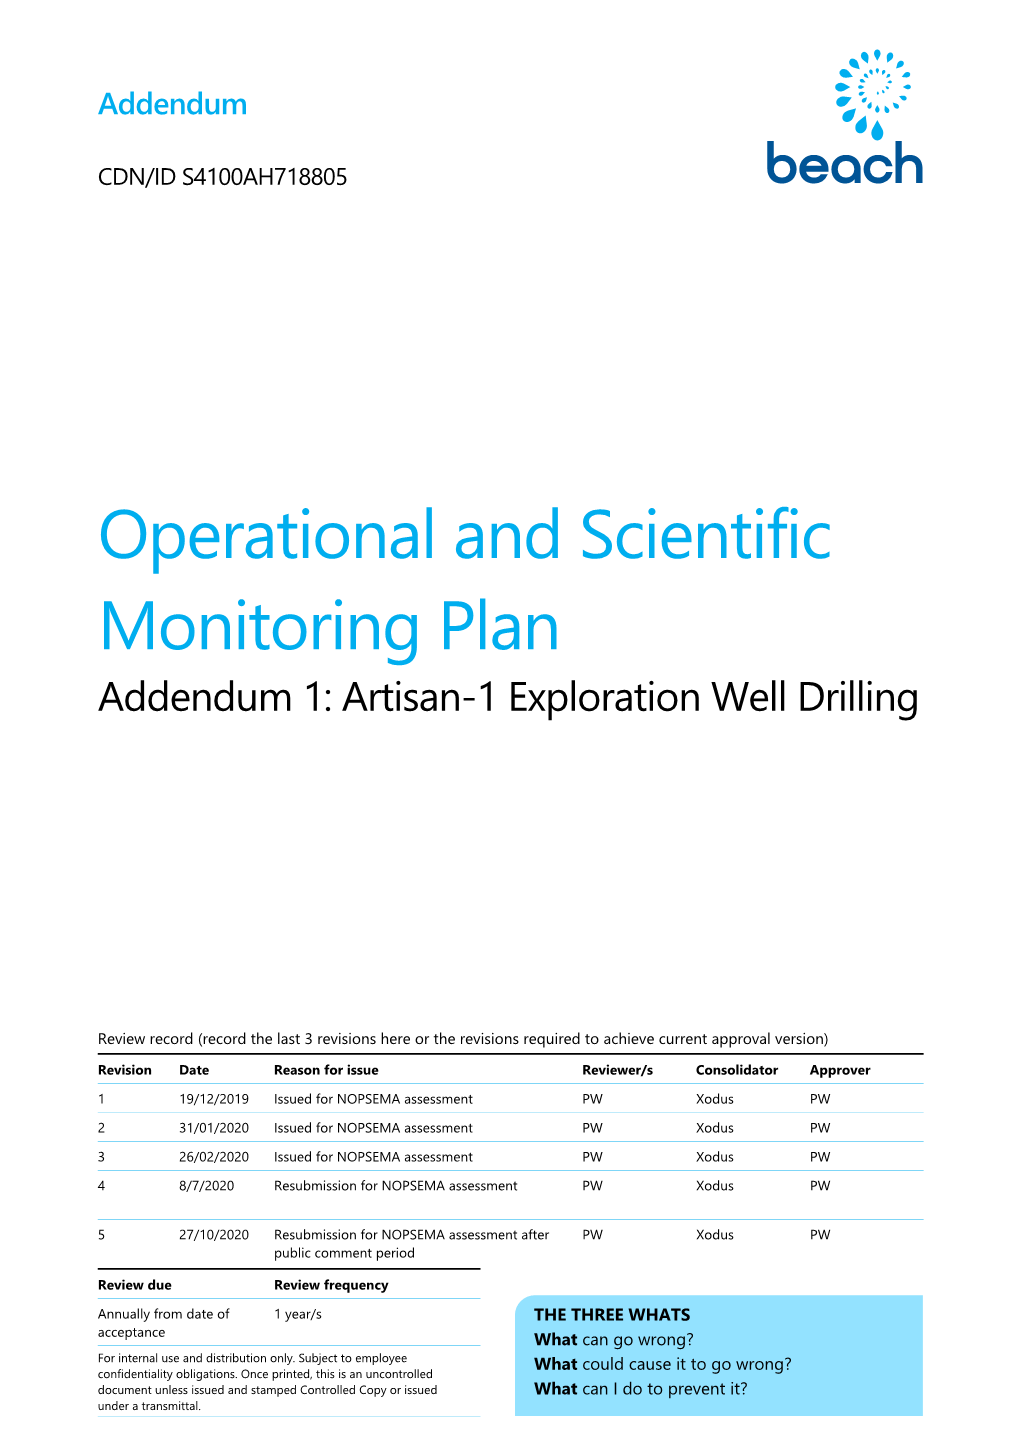 Operational and Scientific Monitoring Plan Addendum 1: Artisan-1 Exploration Well Drilling